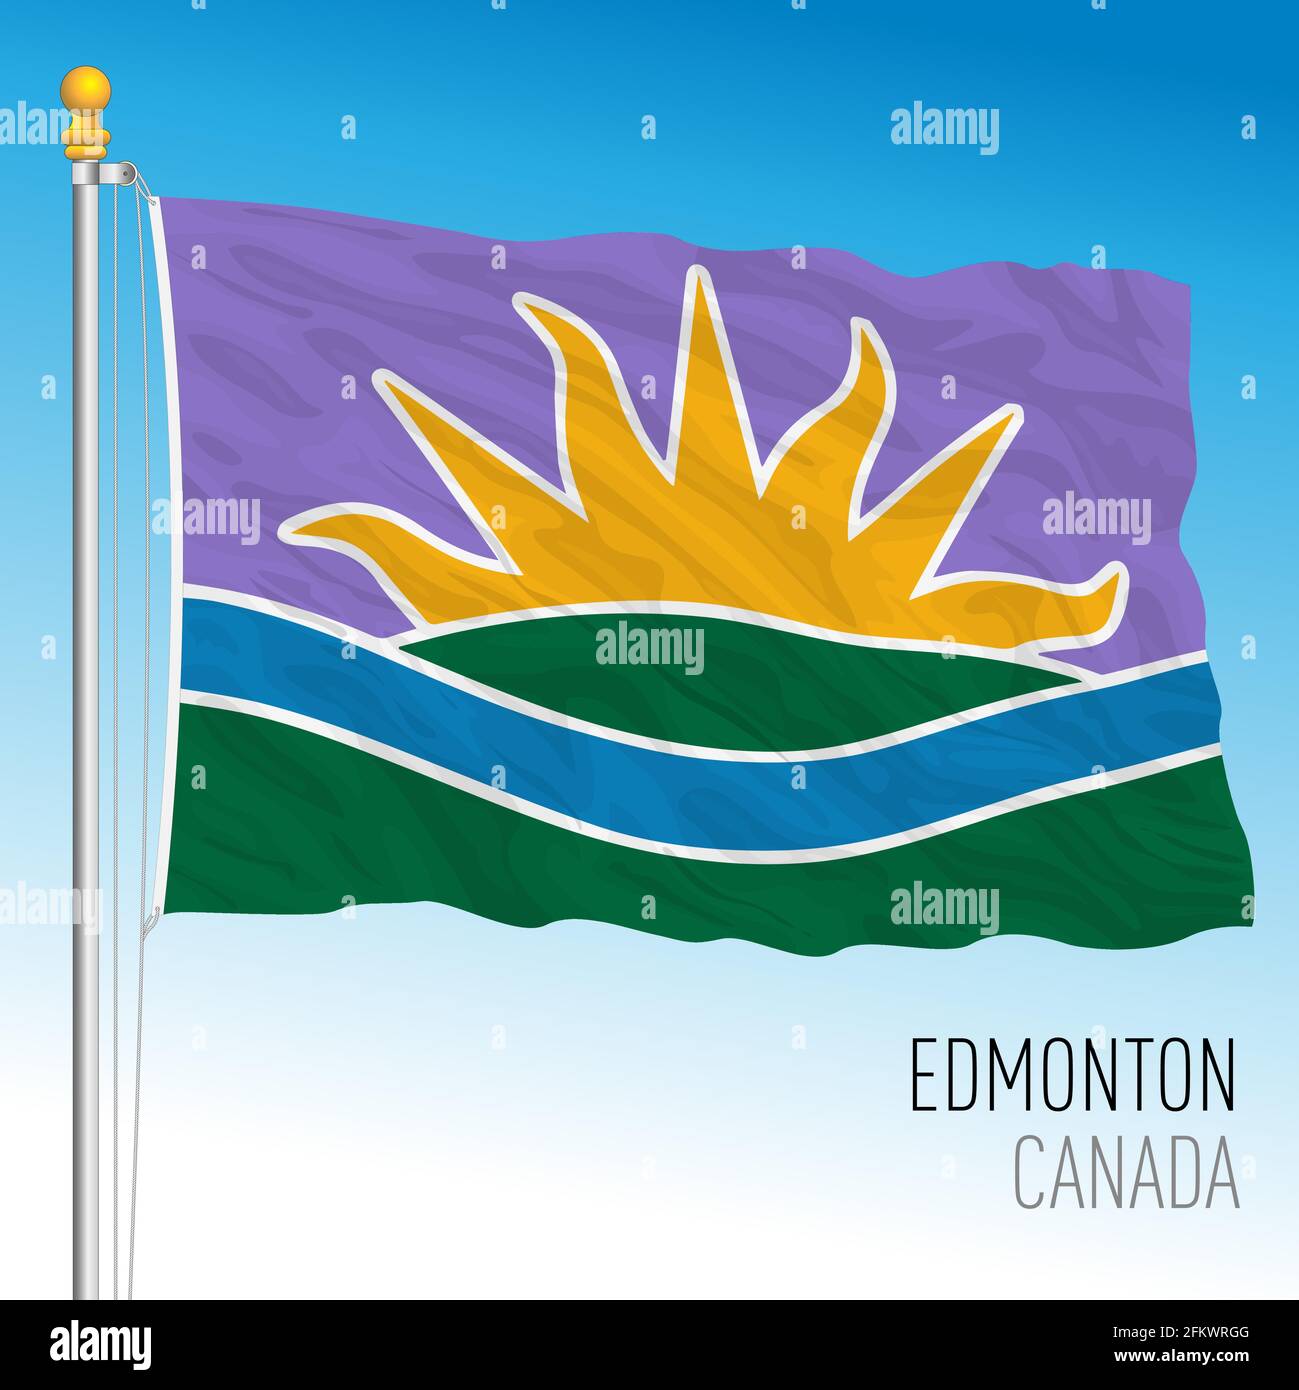 Edmonton city flag, new template, Canada, north american country, vector illustration Stock Vector